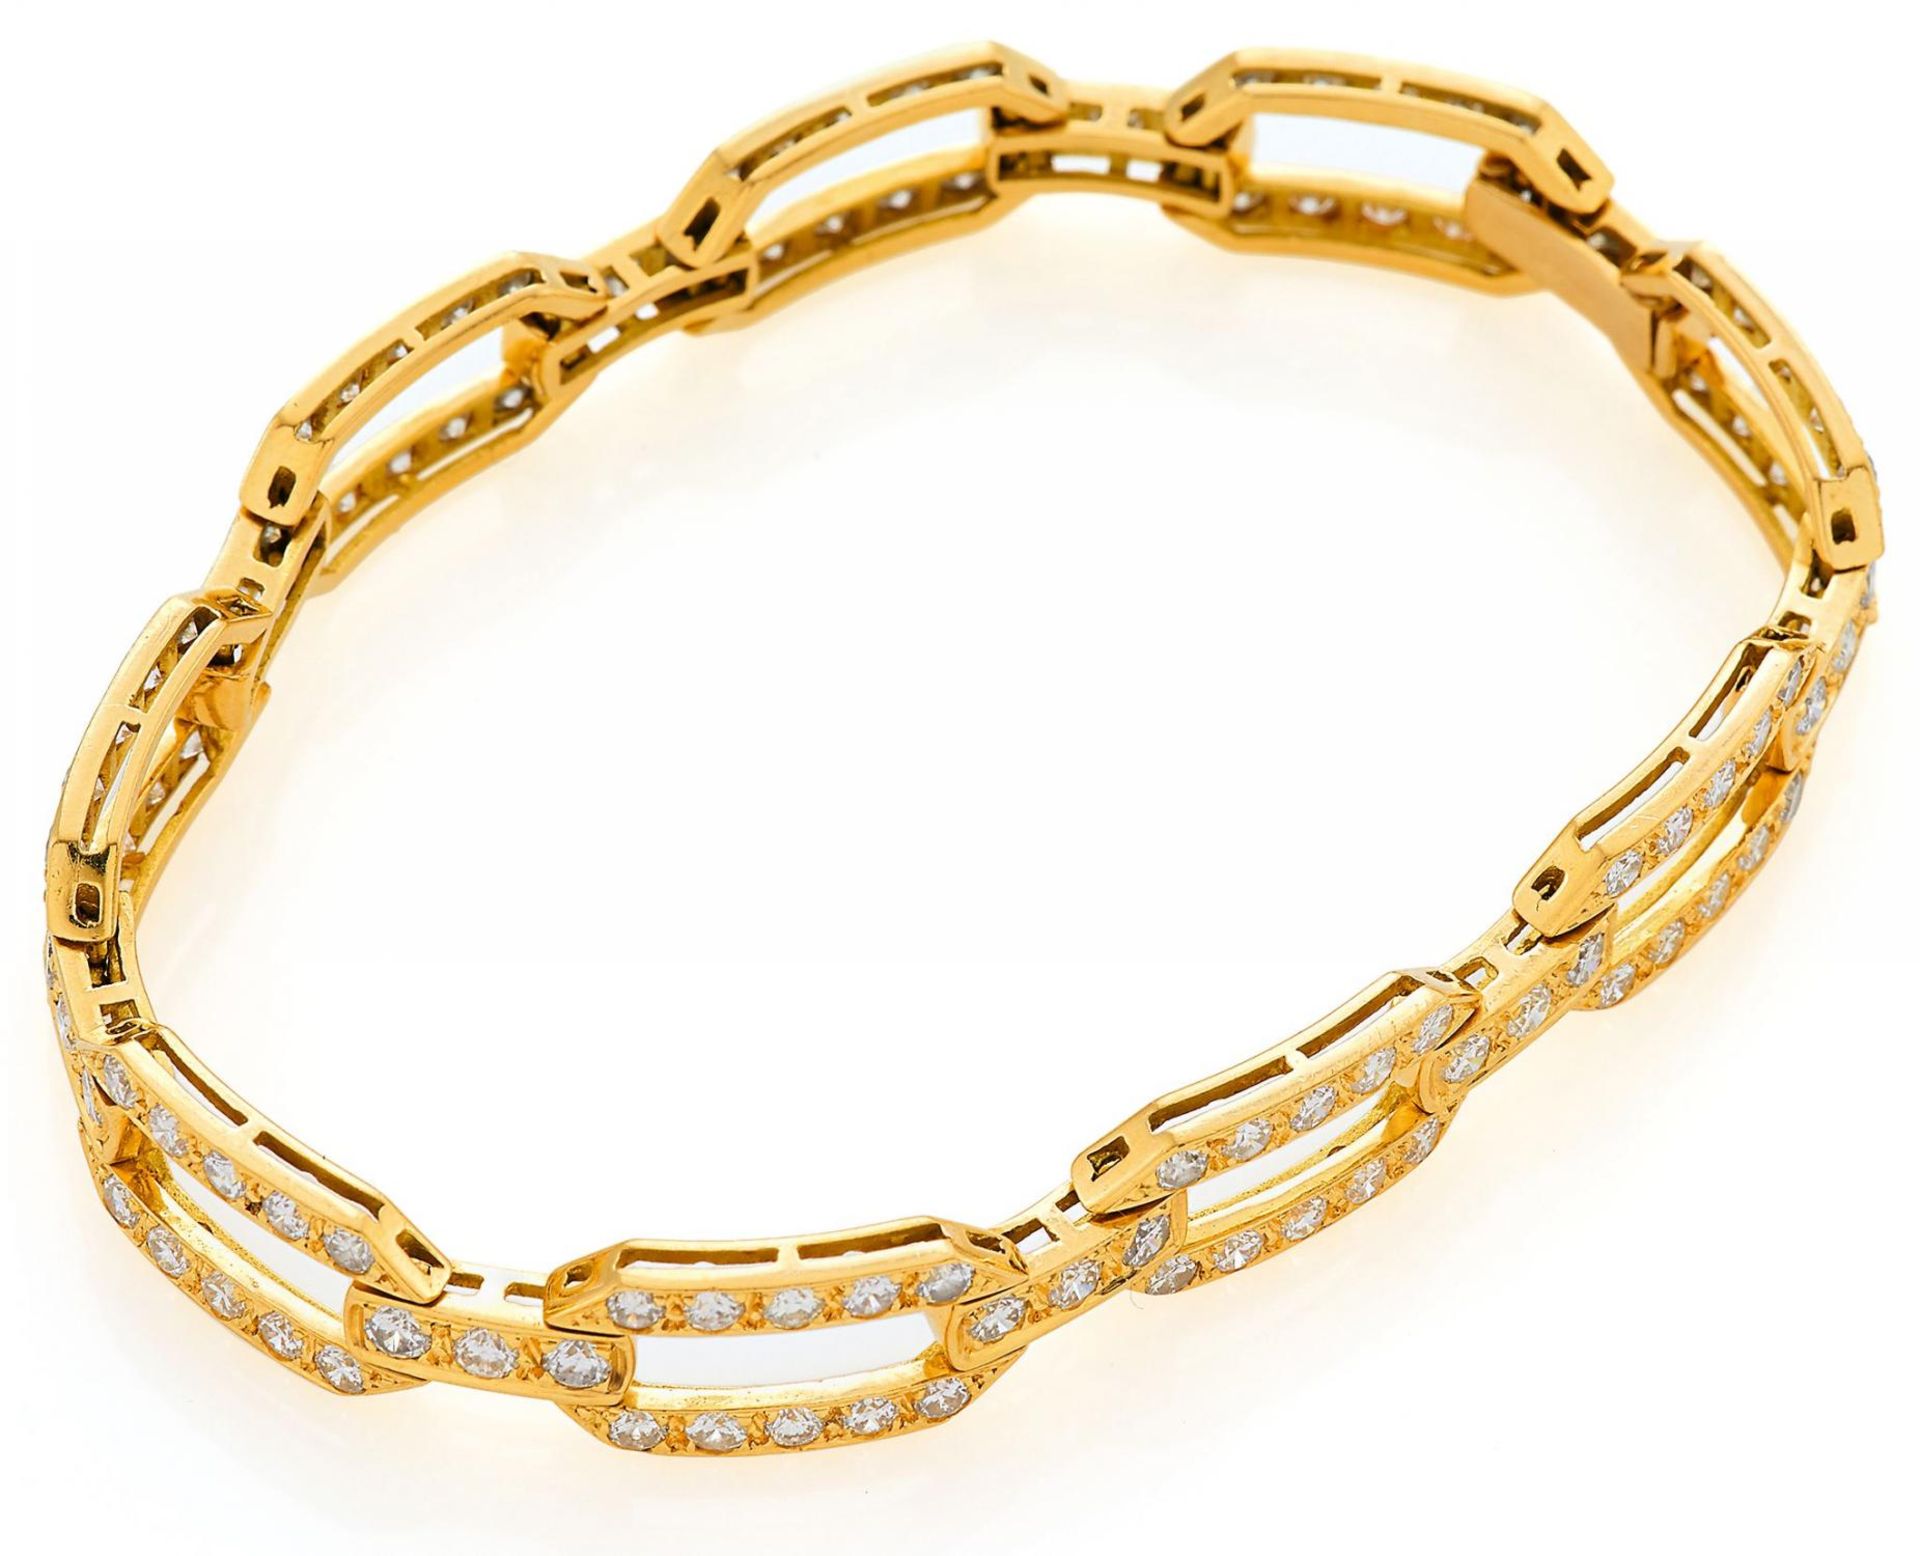 DIAMOND-BRACELET. Origin: France. Date: 1970s. Material: 750/- yellow gold, with mark. Total Weight: